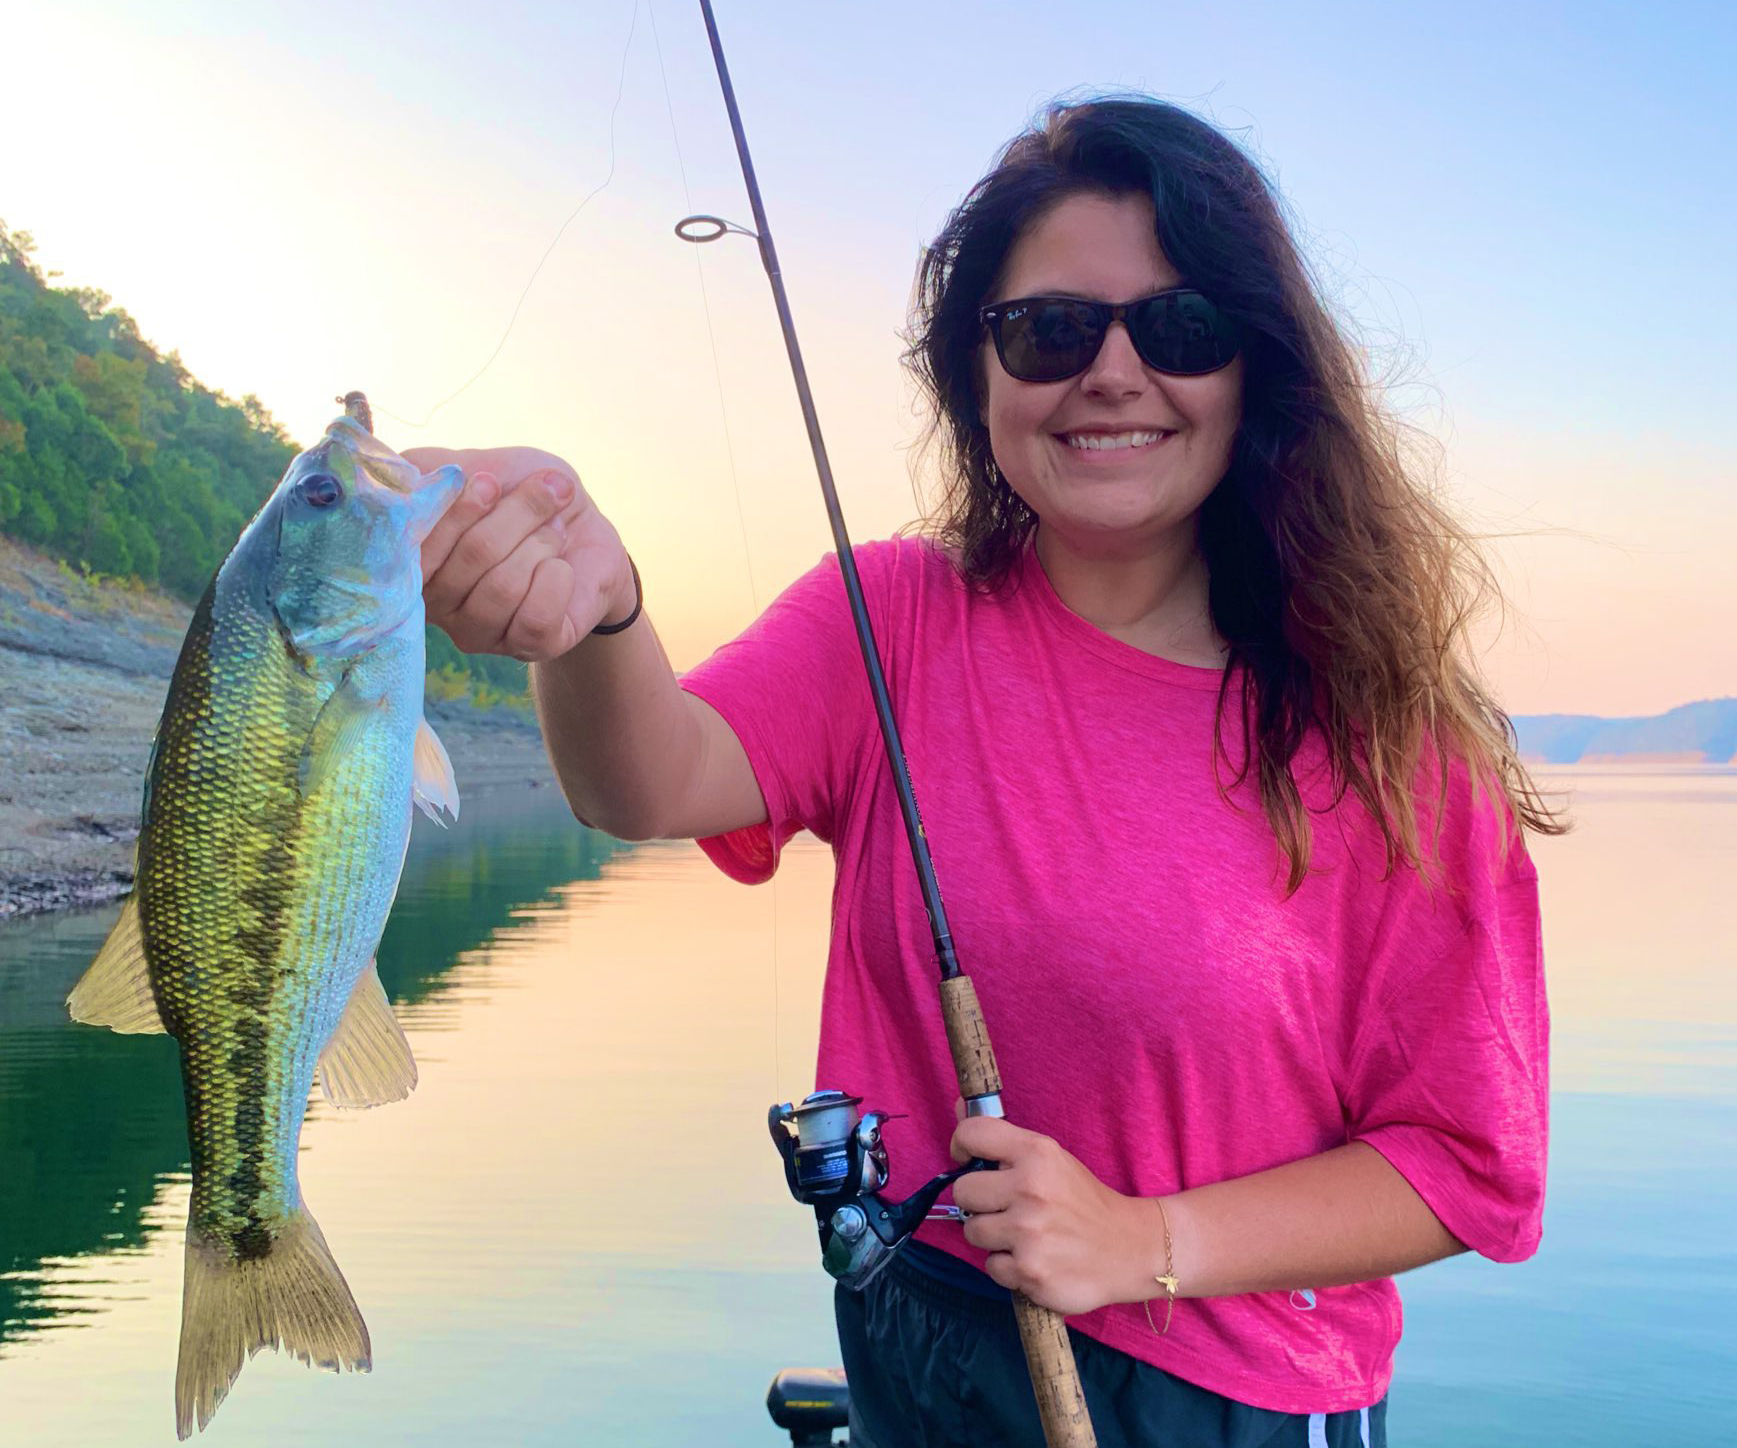 A woman is holding a large spotted bass and a fishing pole